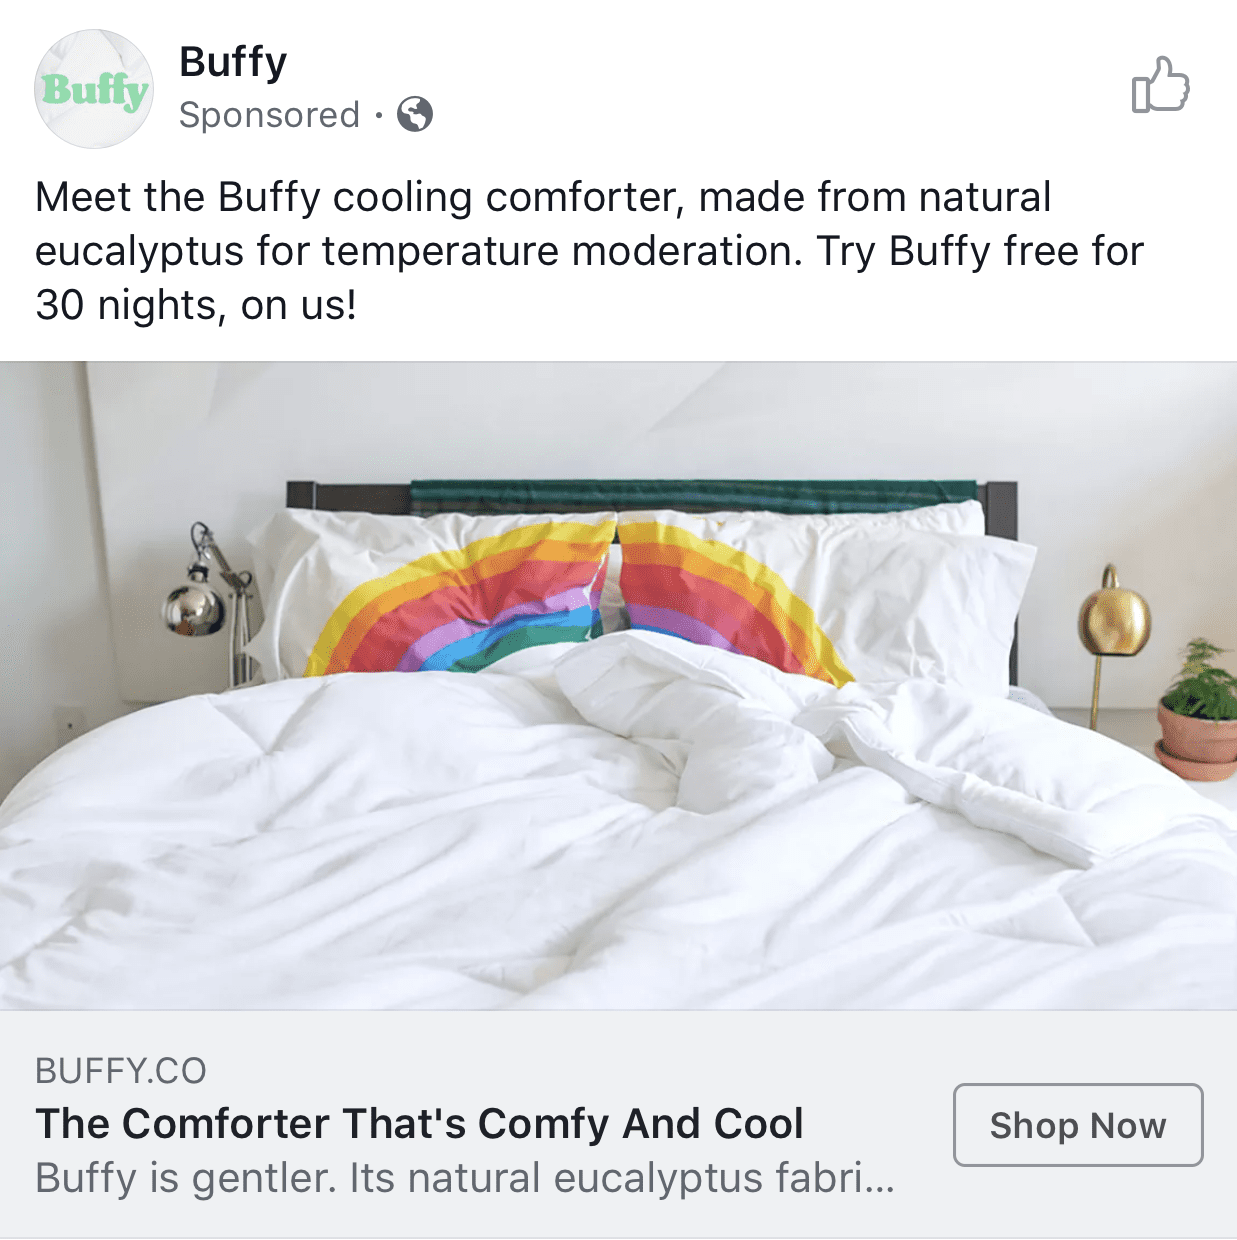 Buffy advertisement with rainbow pillowcases